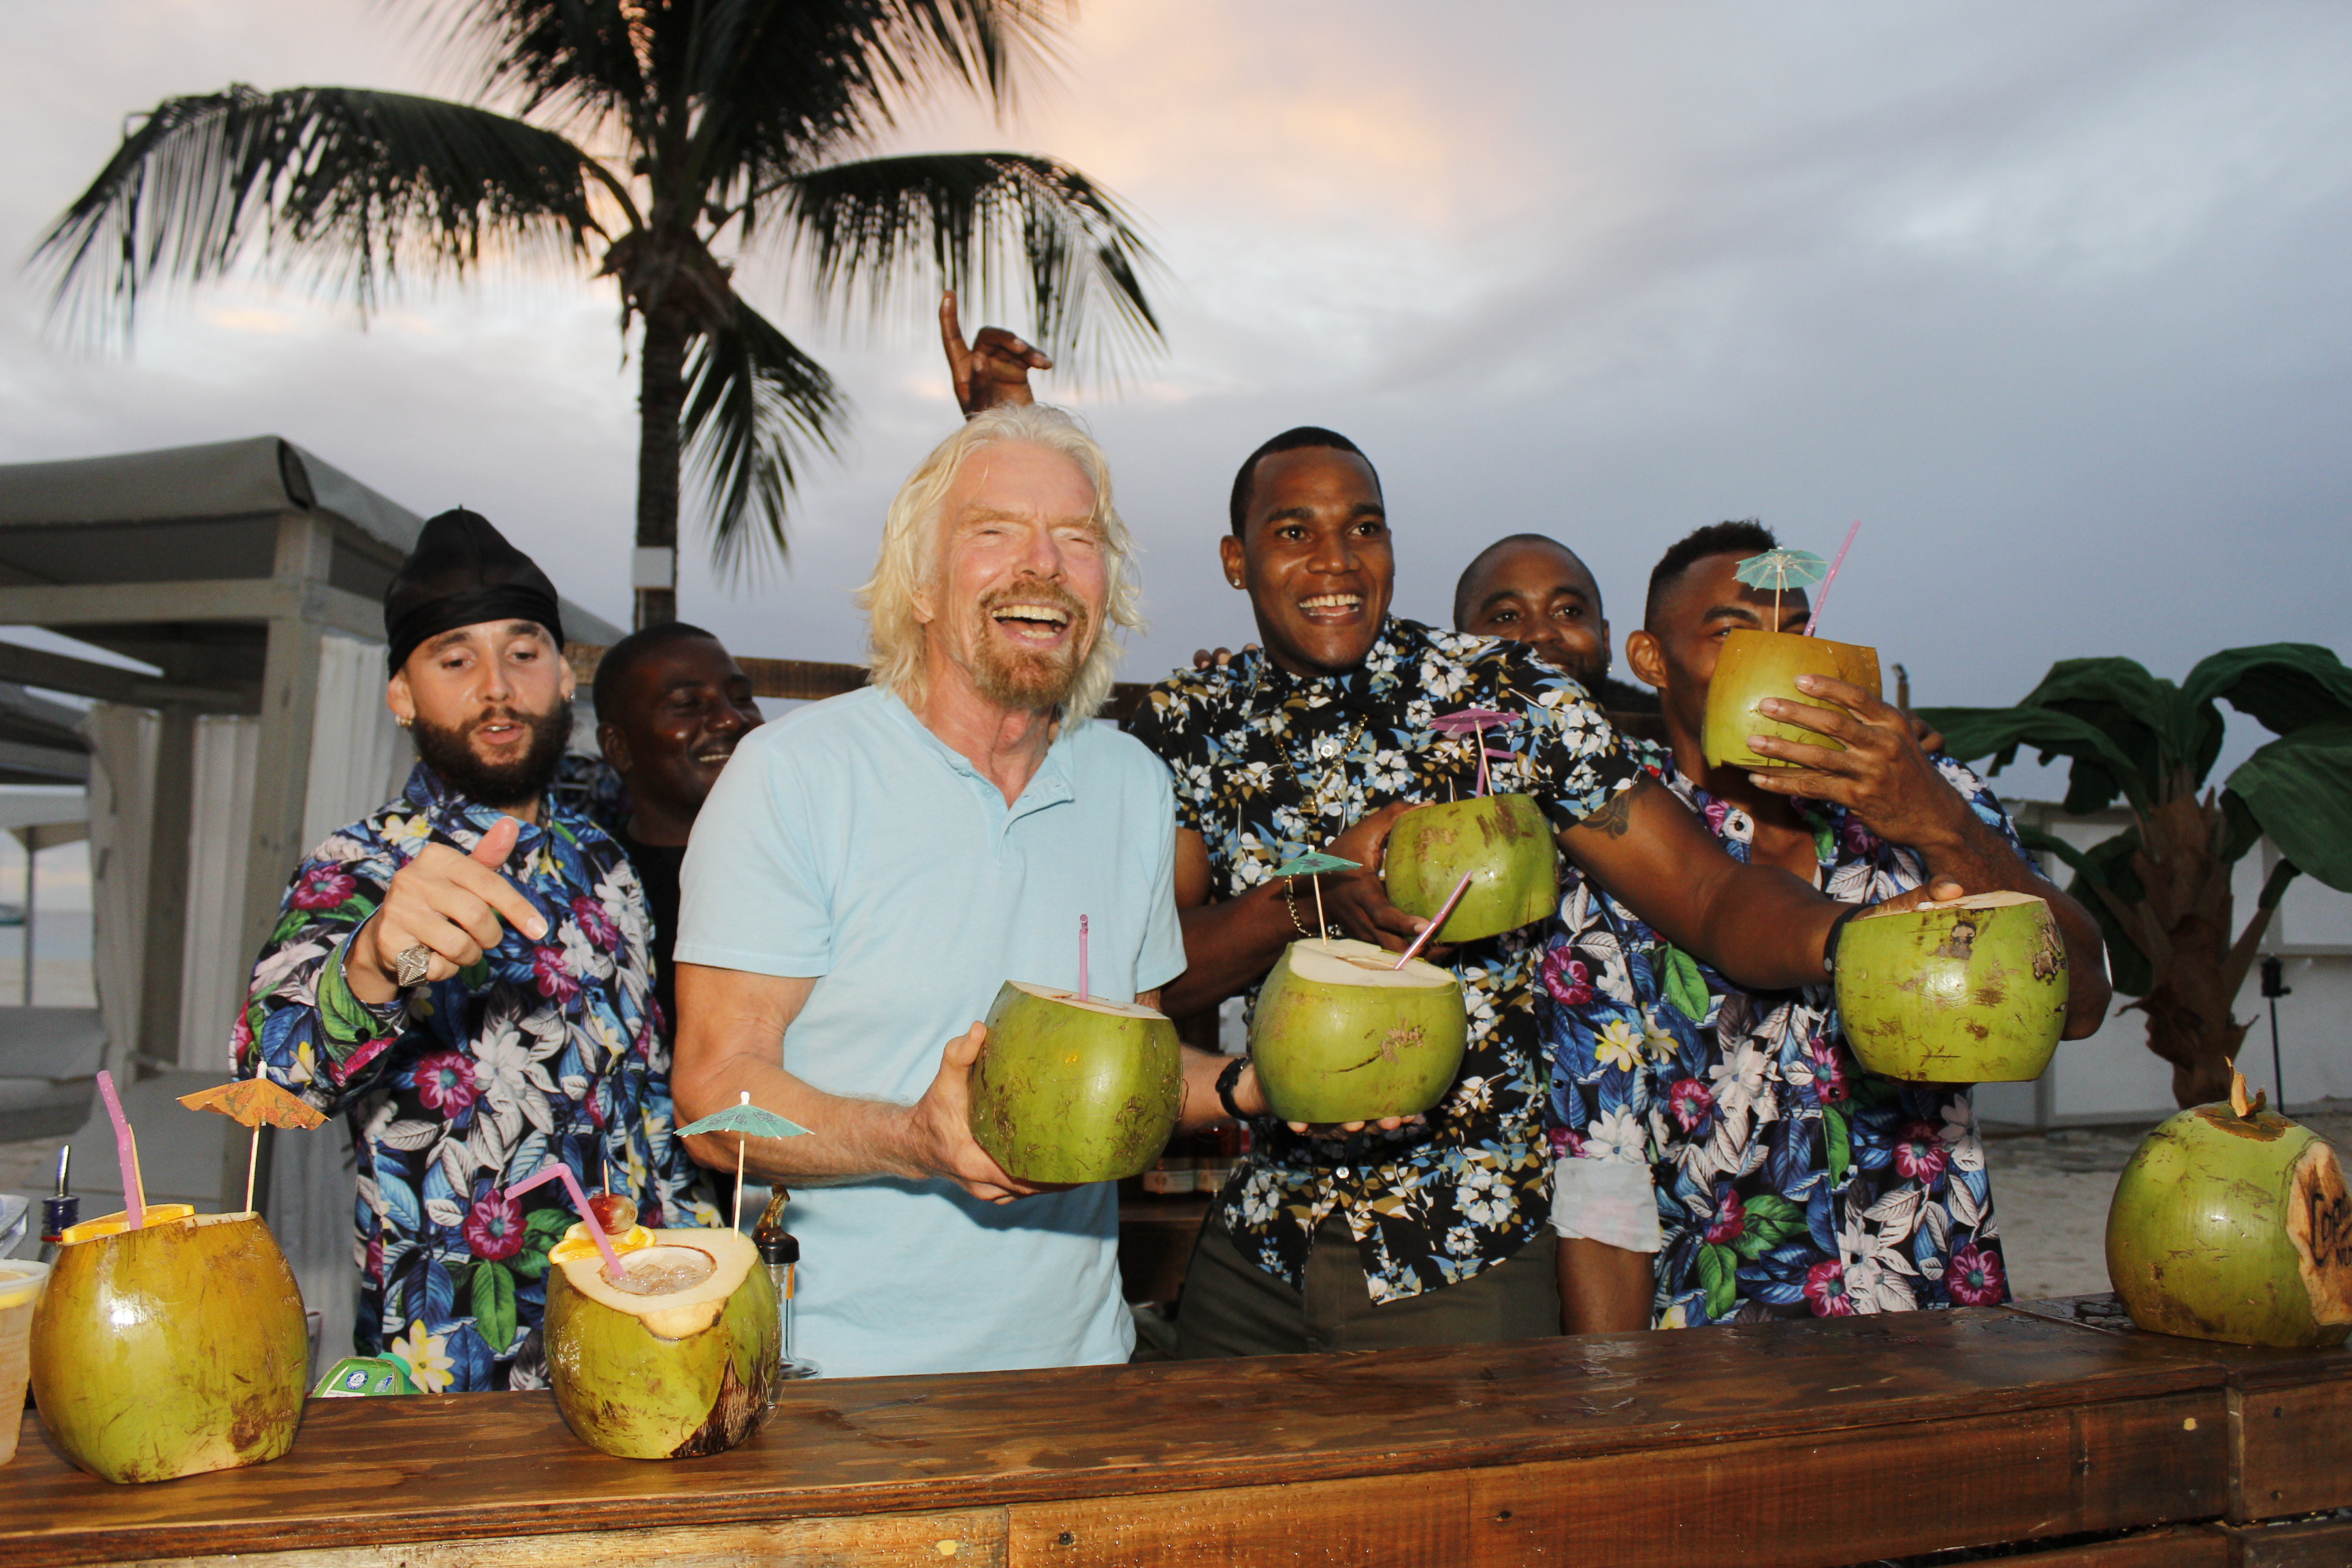 Virgin launches first-ever Departure Beach location in Barbados